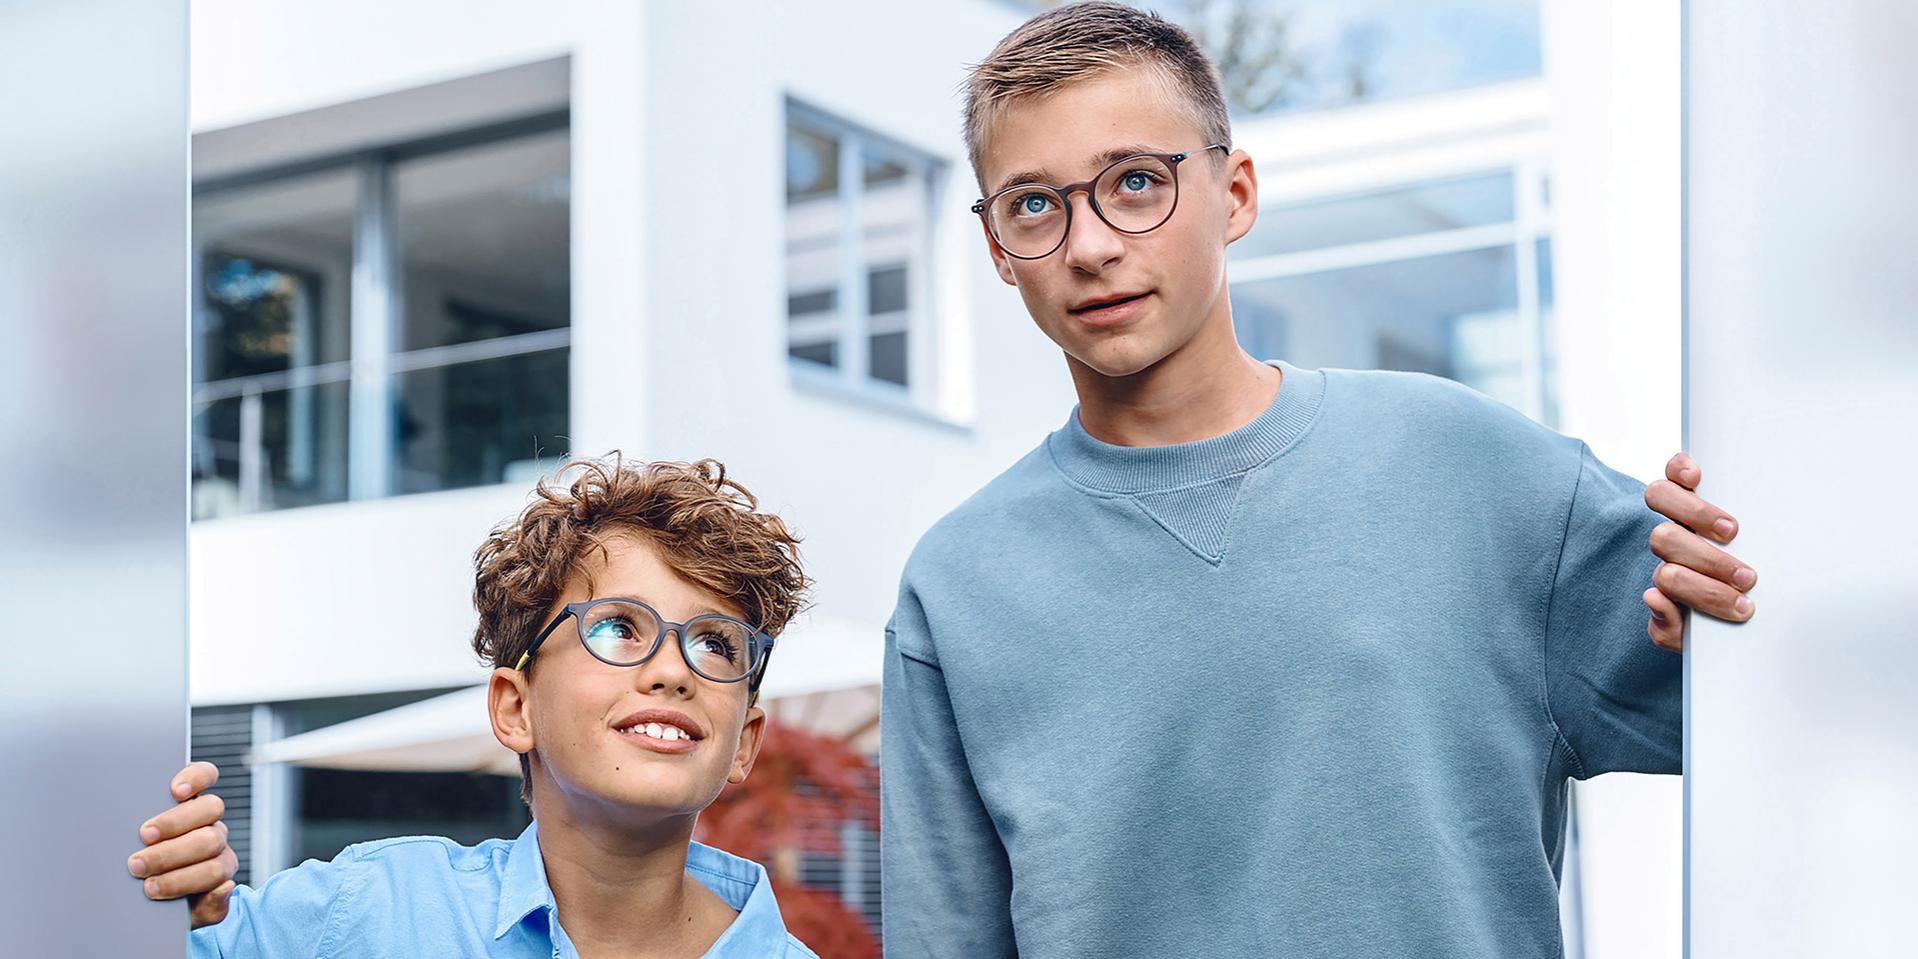 Clear vision for growing children: ZEISS SmartLife Young lenses